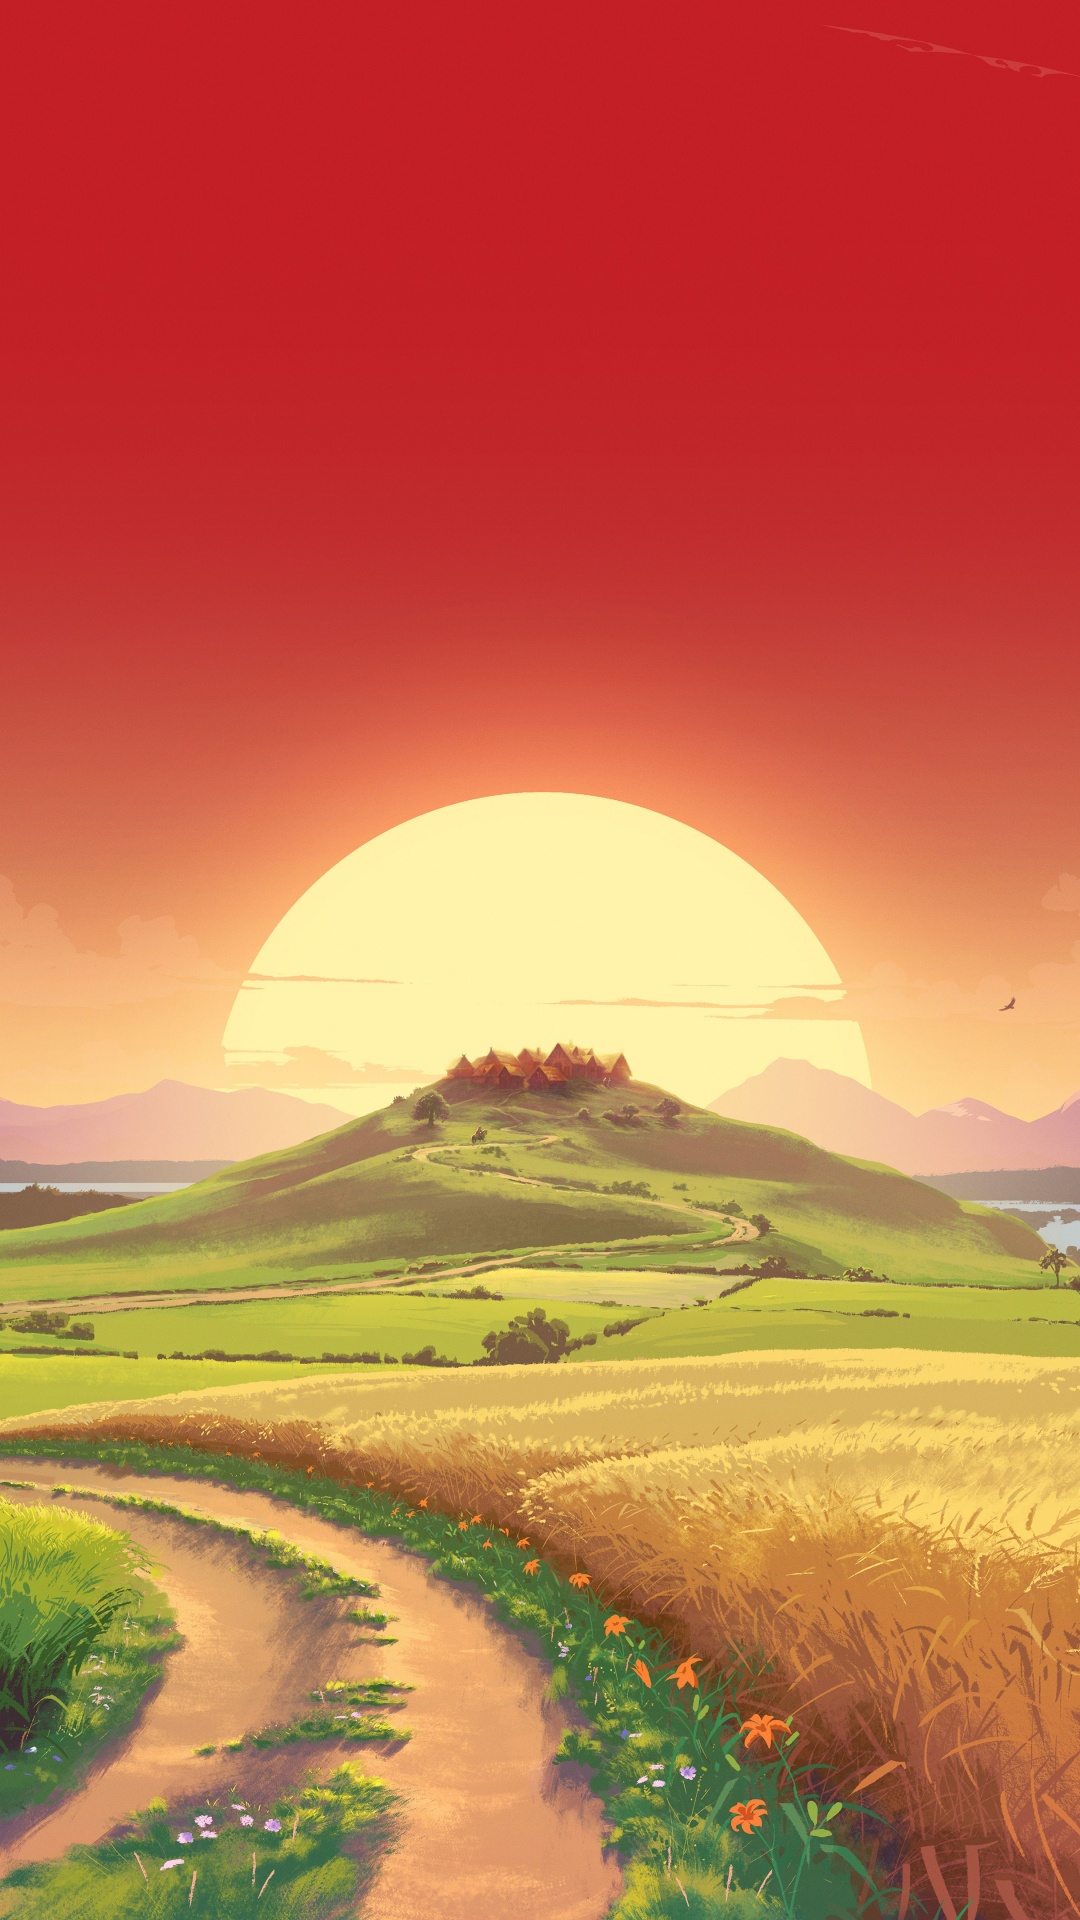 Sunrise Landscape, Sunrise, Landscape, Nature, Landscape Painting. Wallpaper in 1080x1920 Resolution